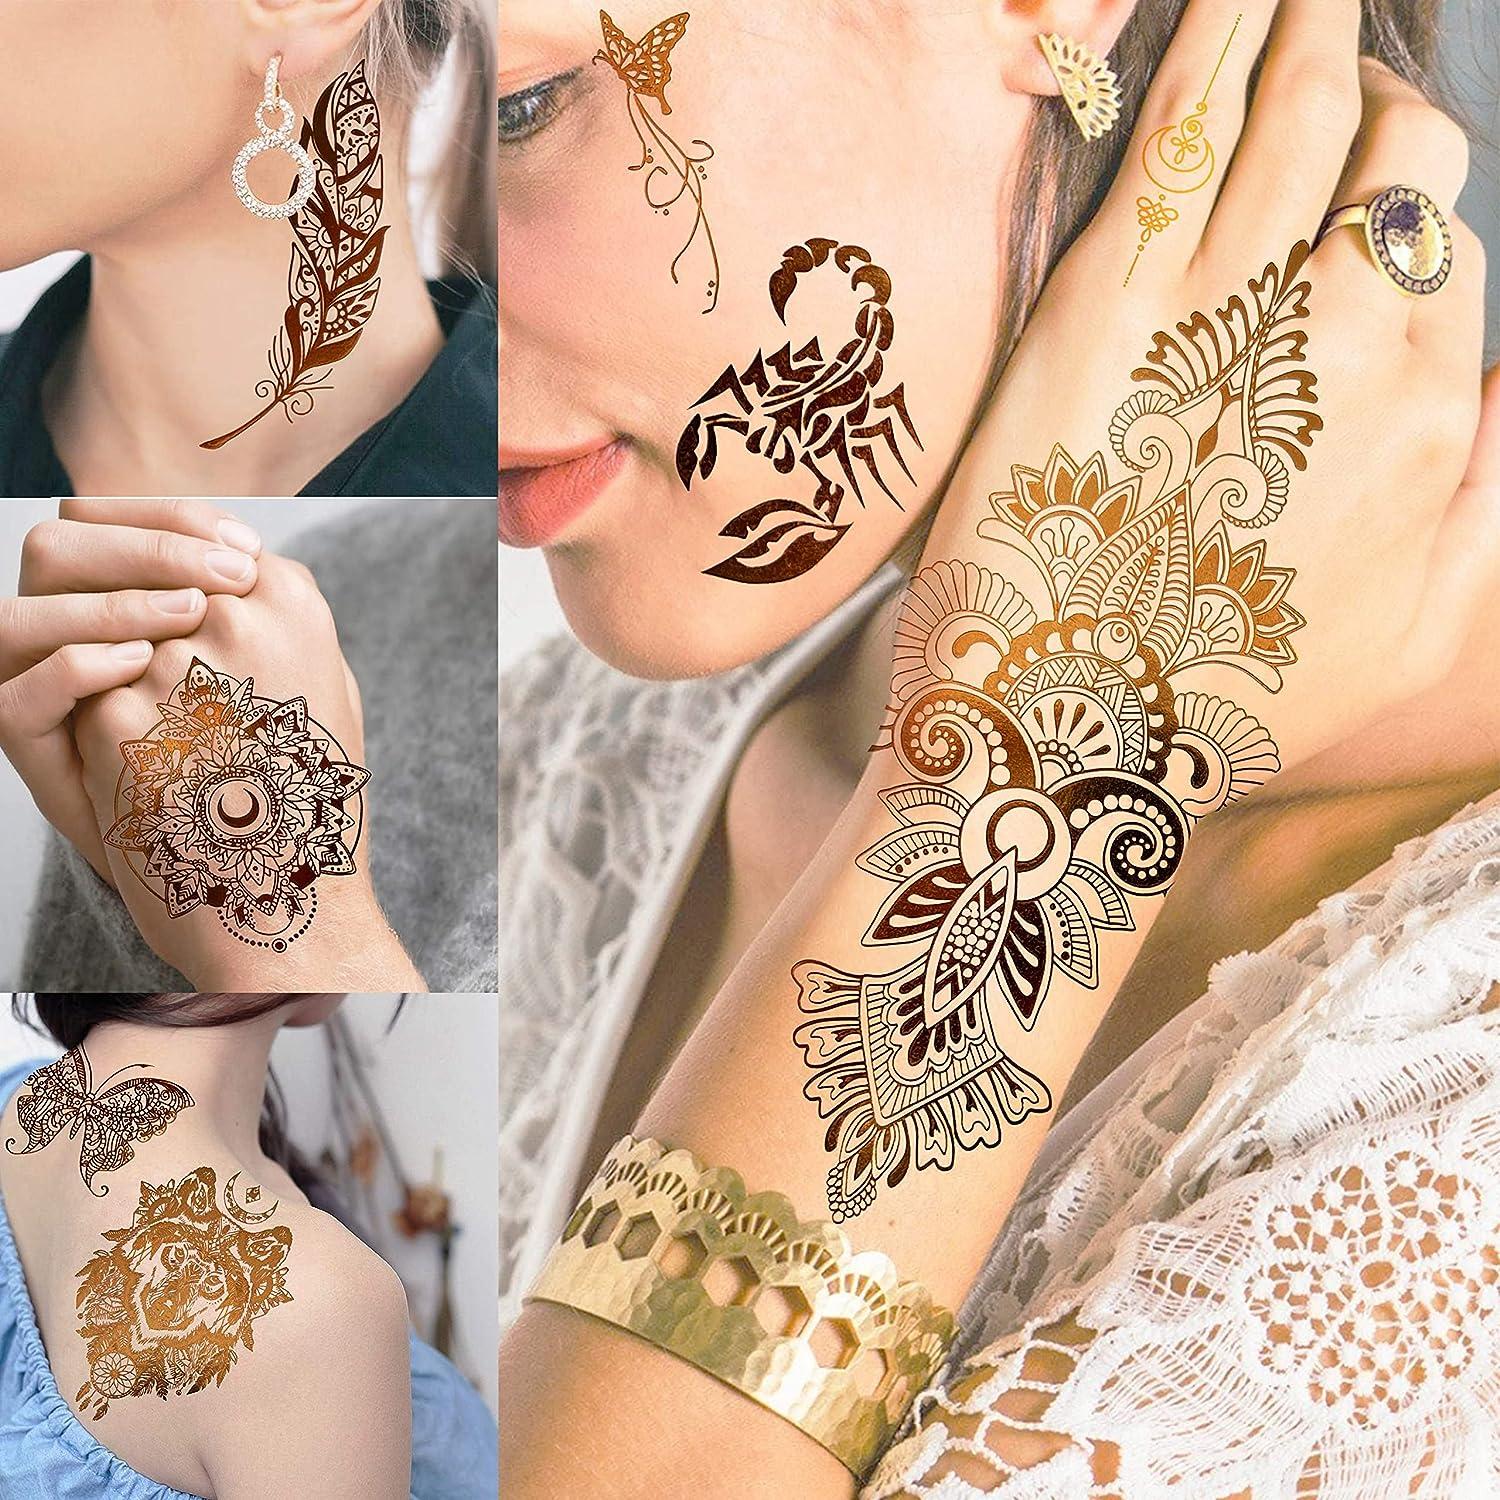 Women Snake Temporary Tattoos Stickers Waterproof Hotwife Eagle Henna Tattoo  Fake Body Art Festival Accessories Fashion Hot Girl From Soapsane, $8.13 |  DHgate.Com